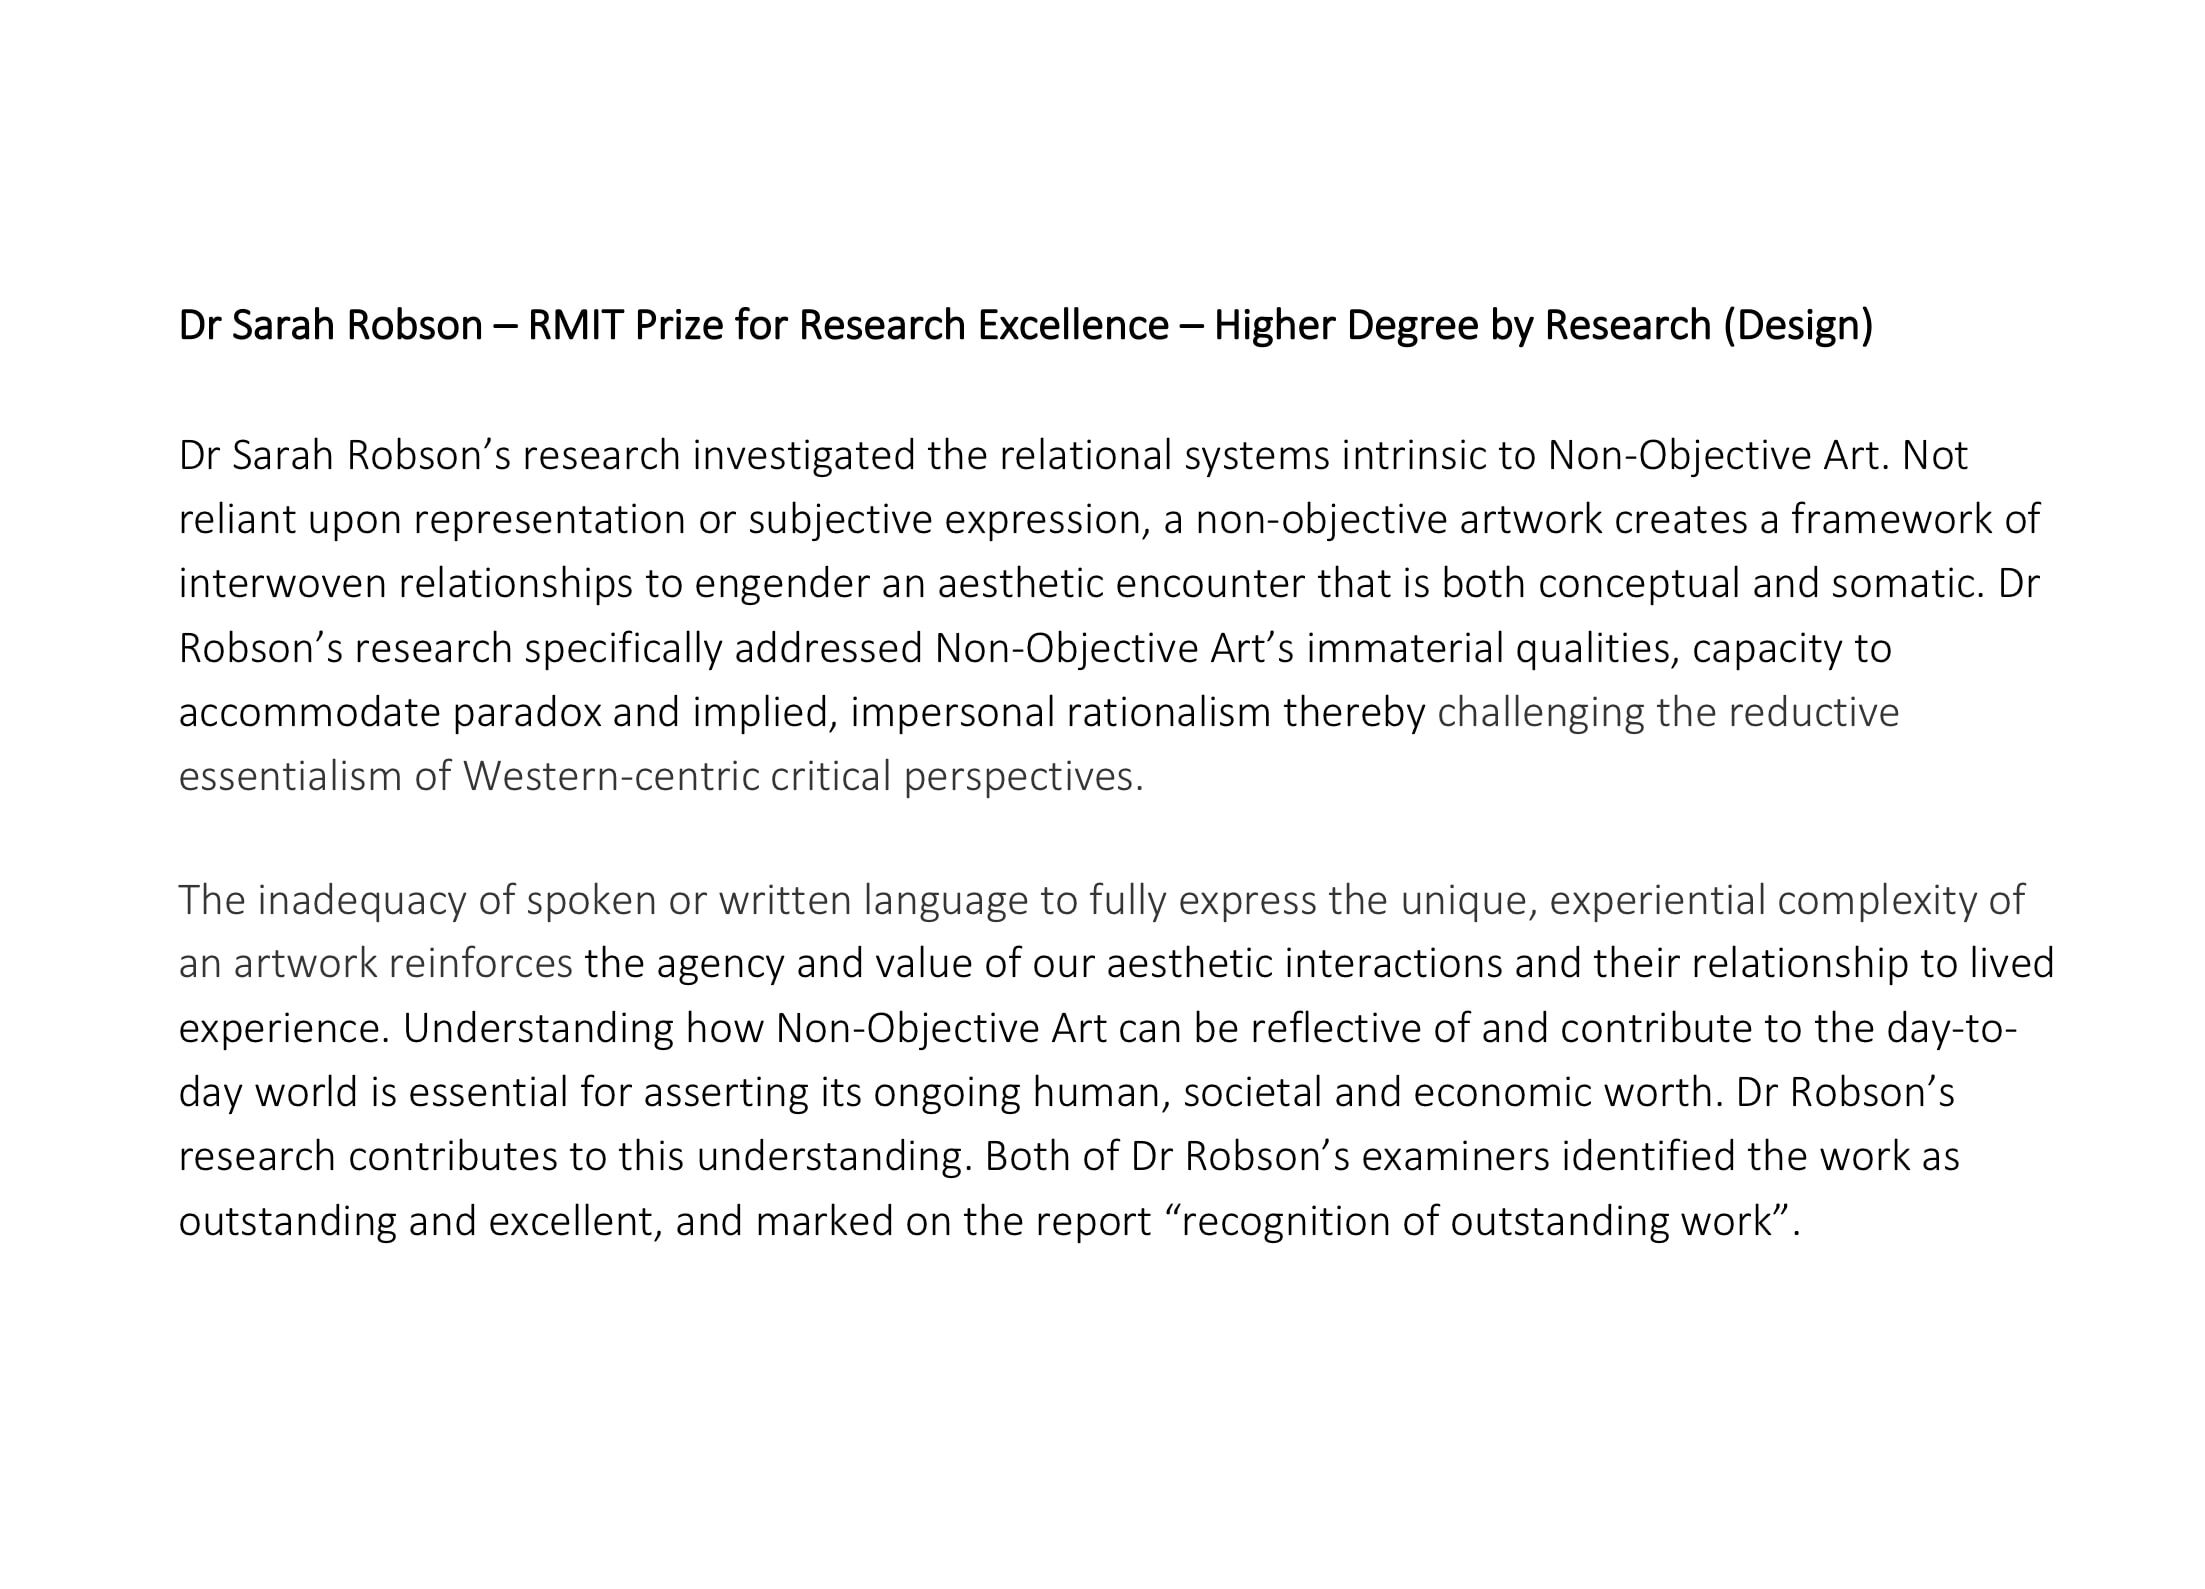 Dr_S.Robson_RMIT_PRIZE